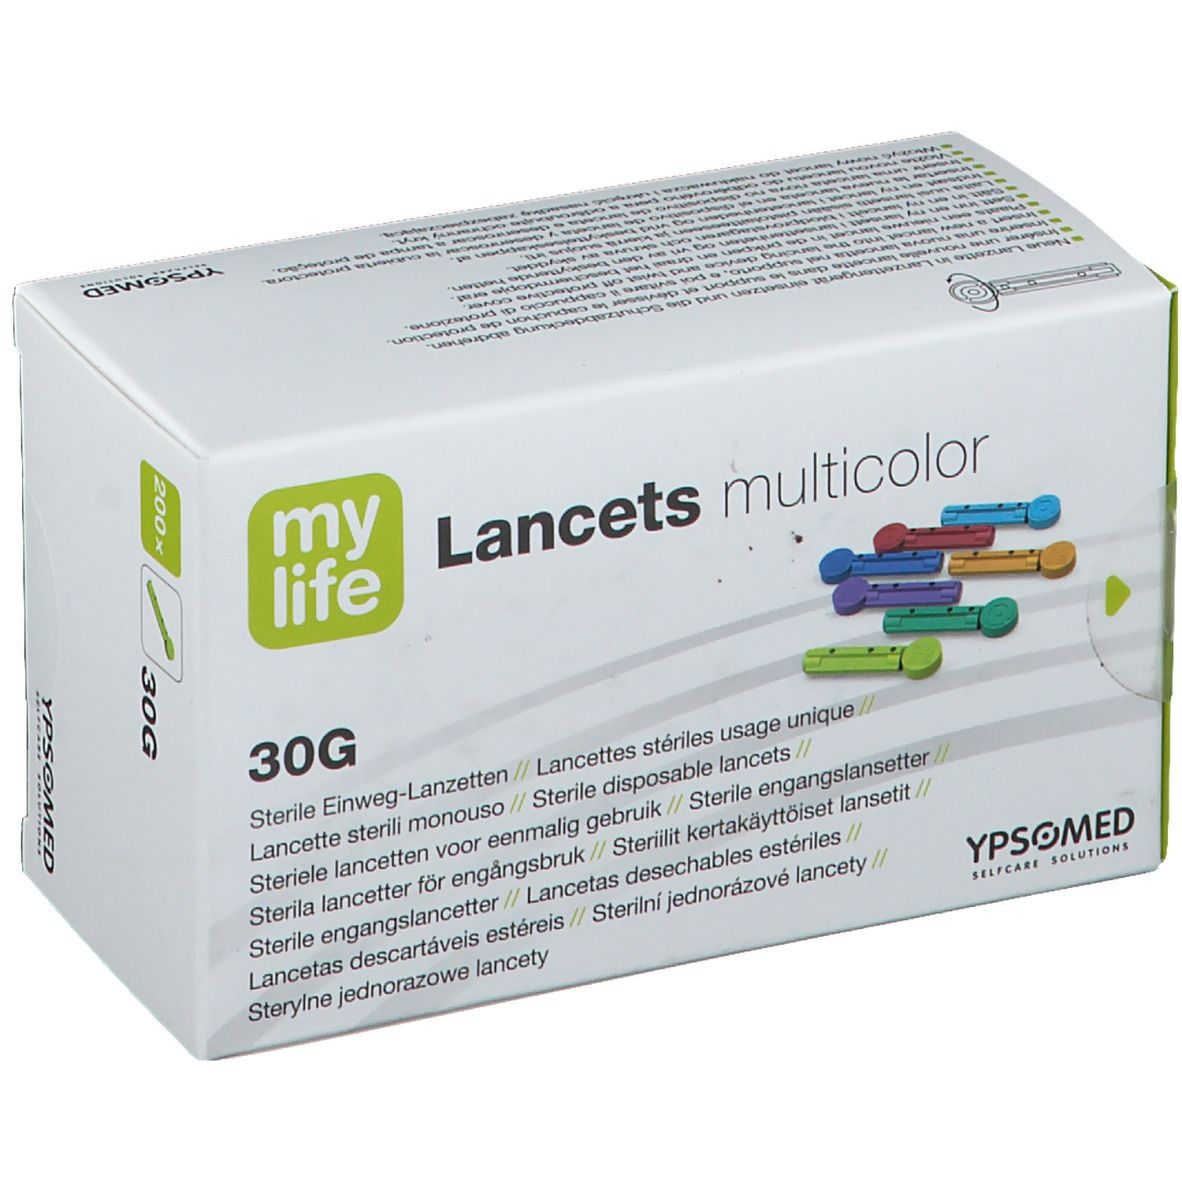 mylife Lancets multicolor